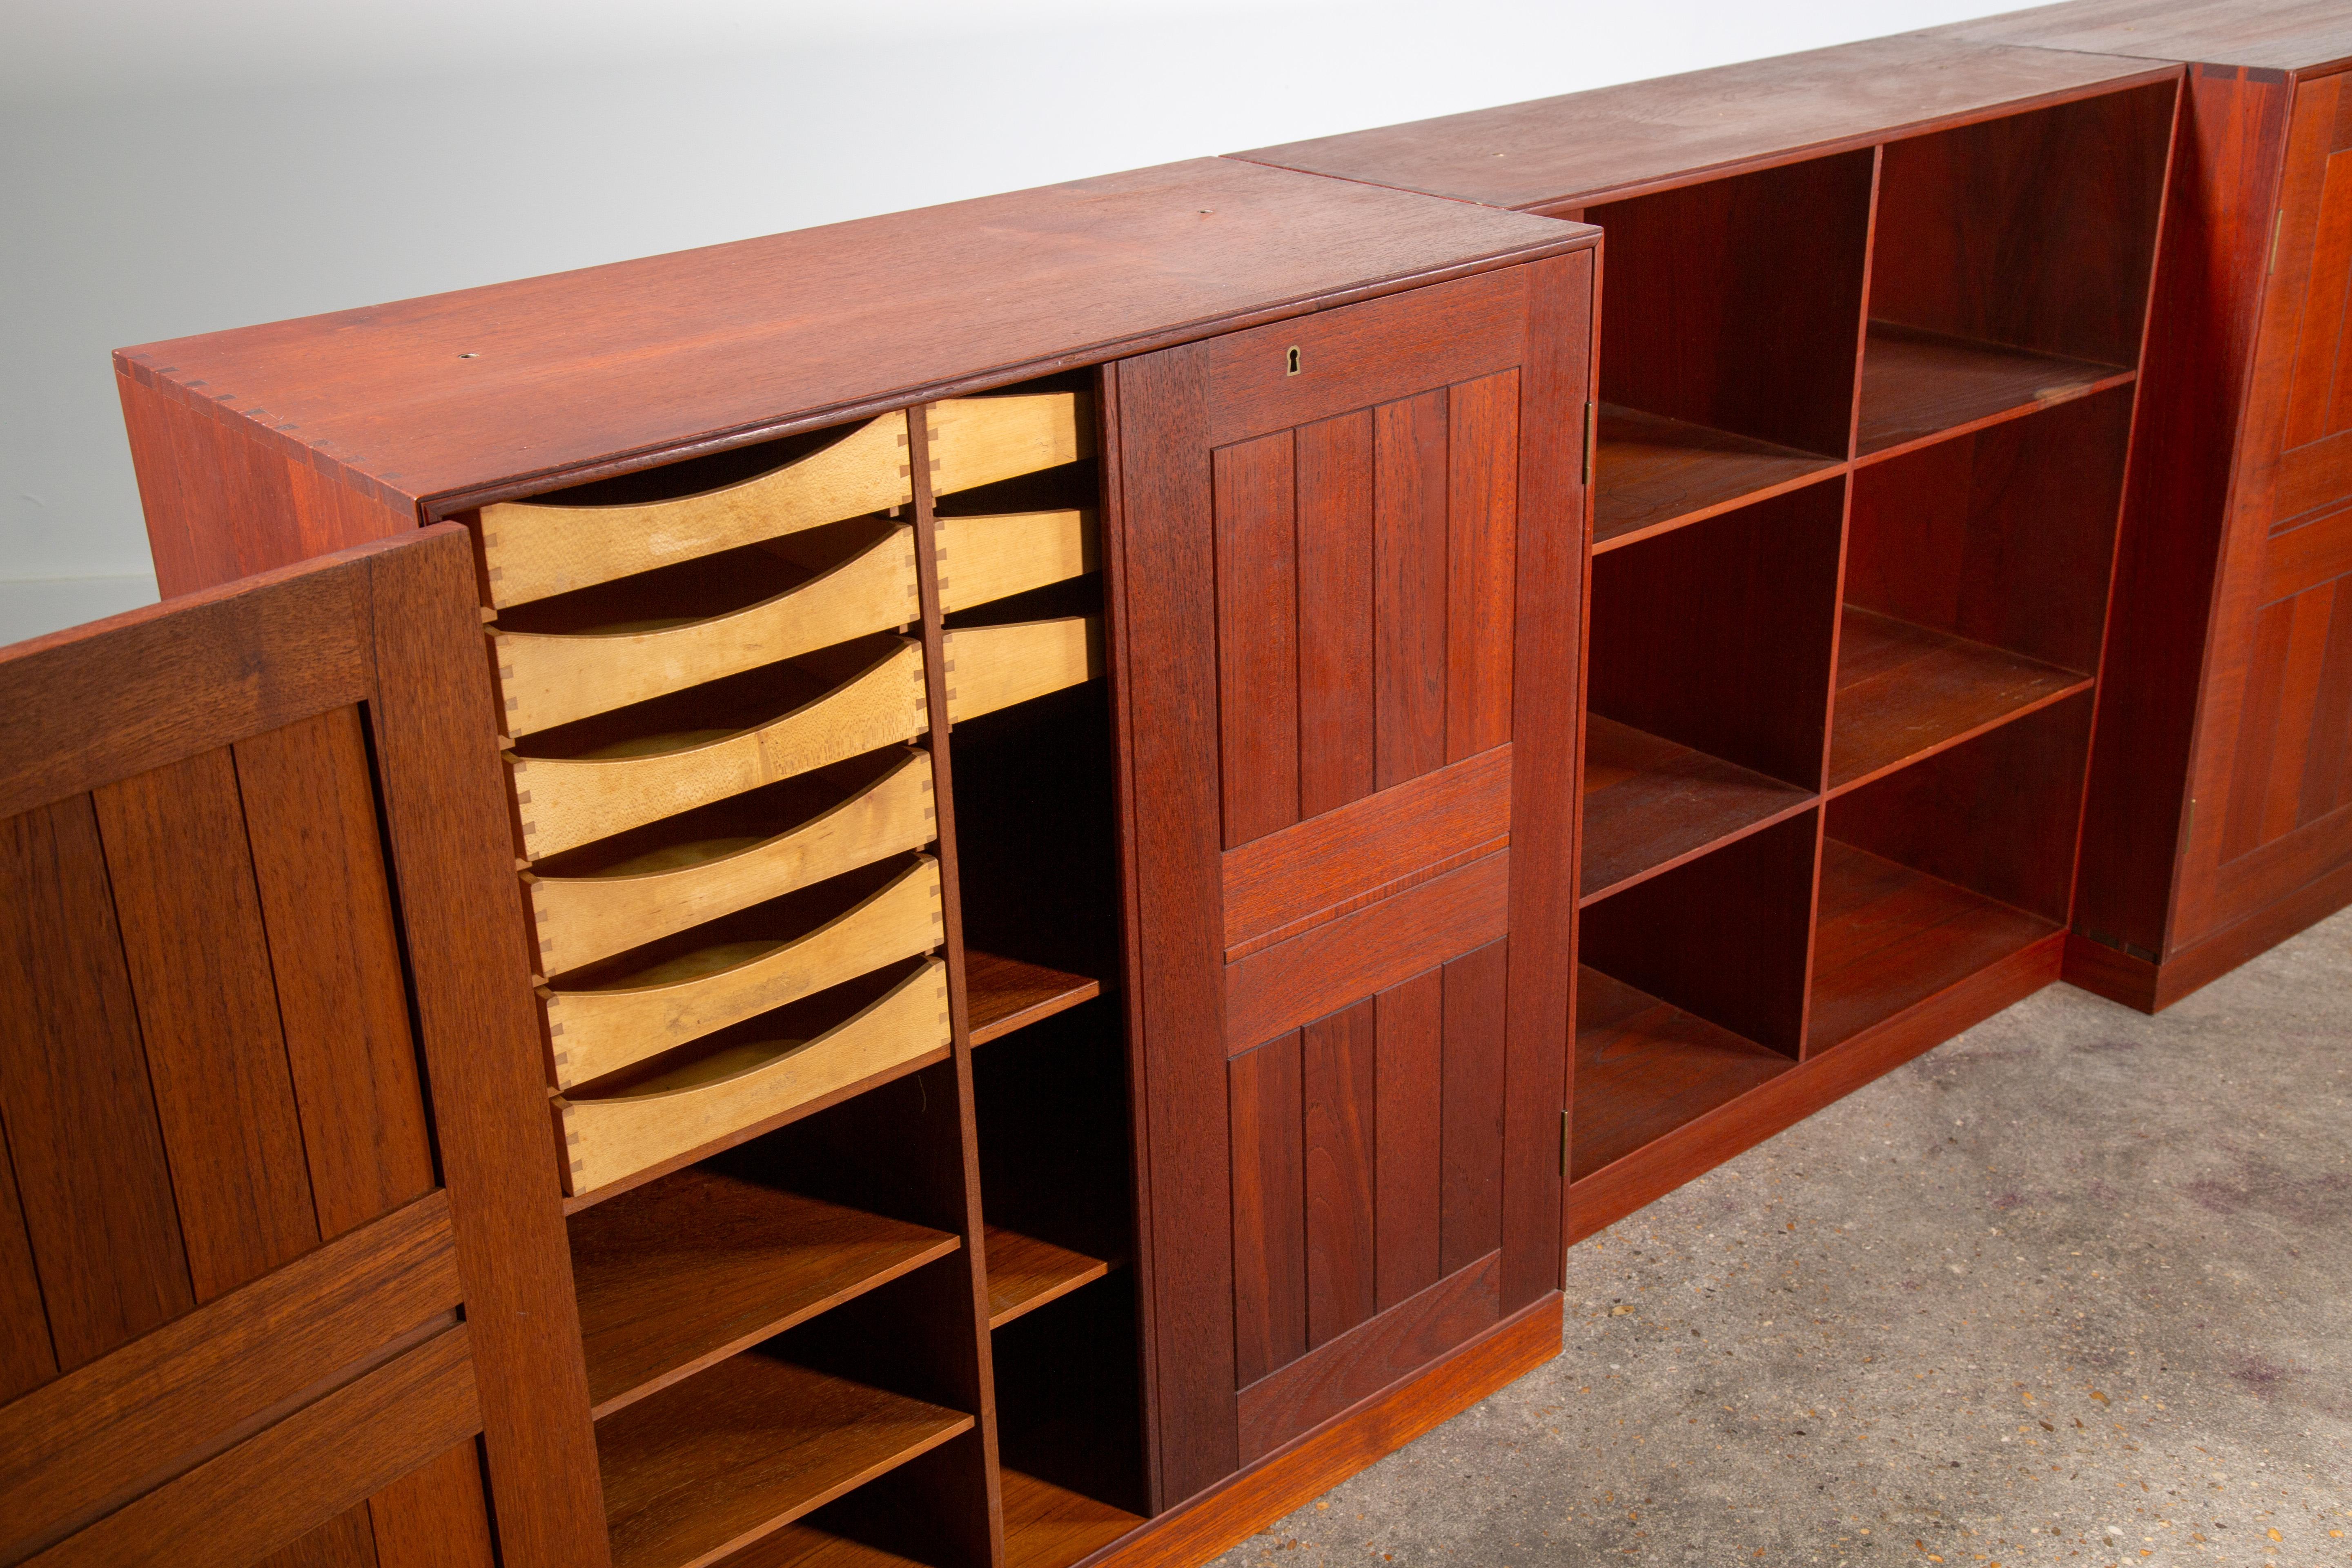 Mid-20th Century A set of 3 Cabinets by Mogens Koch for Rud Rasmussen in Teak Danish mid century  For Sale